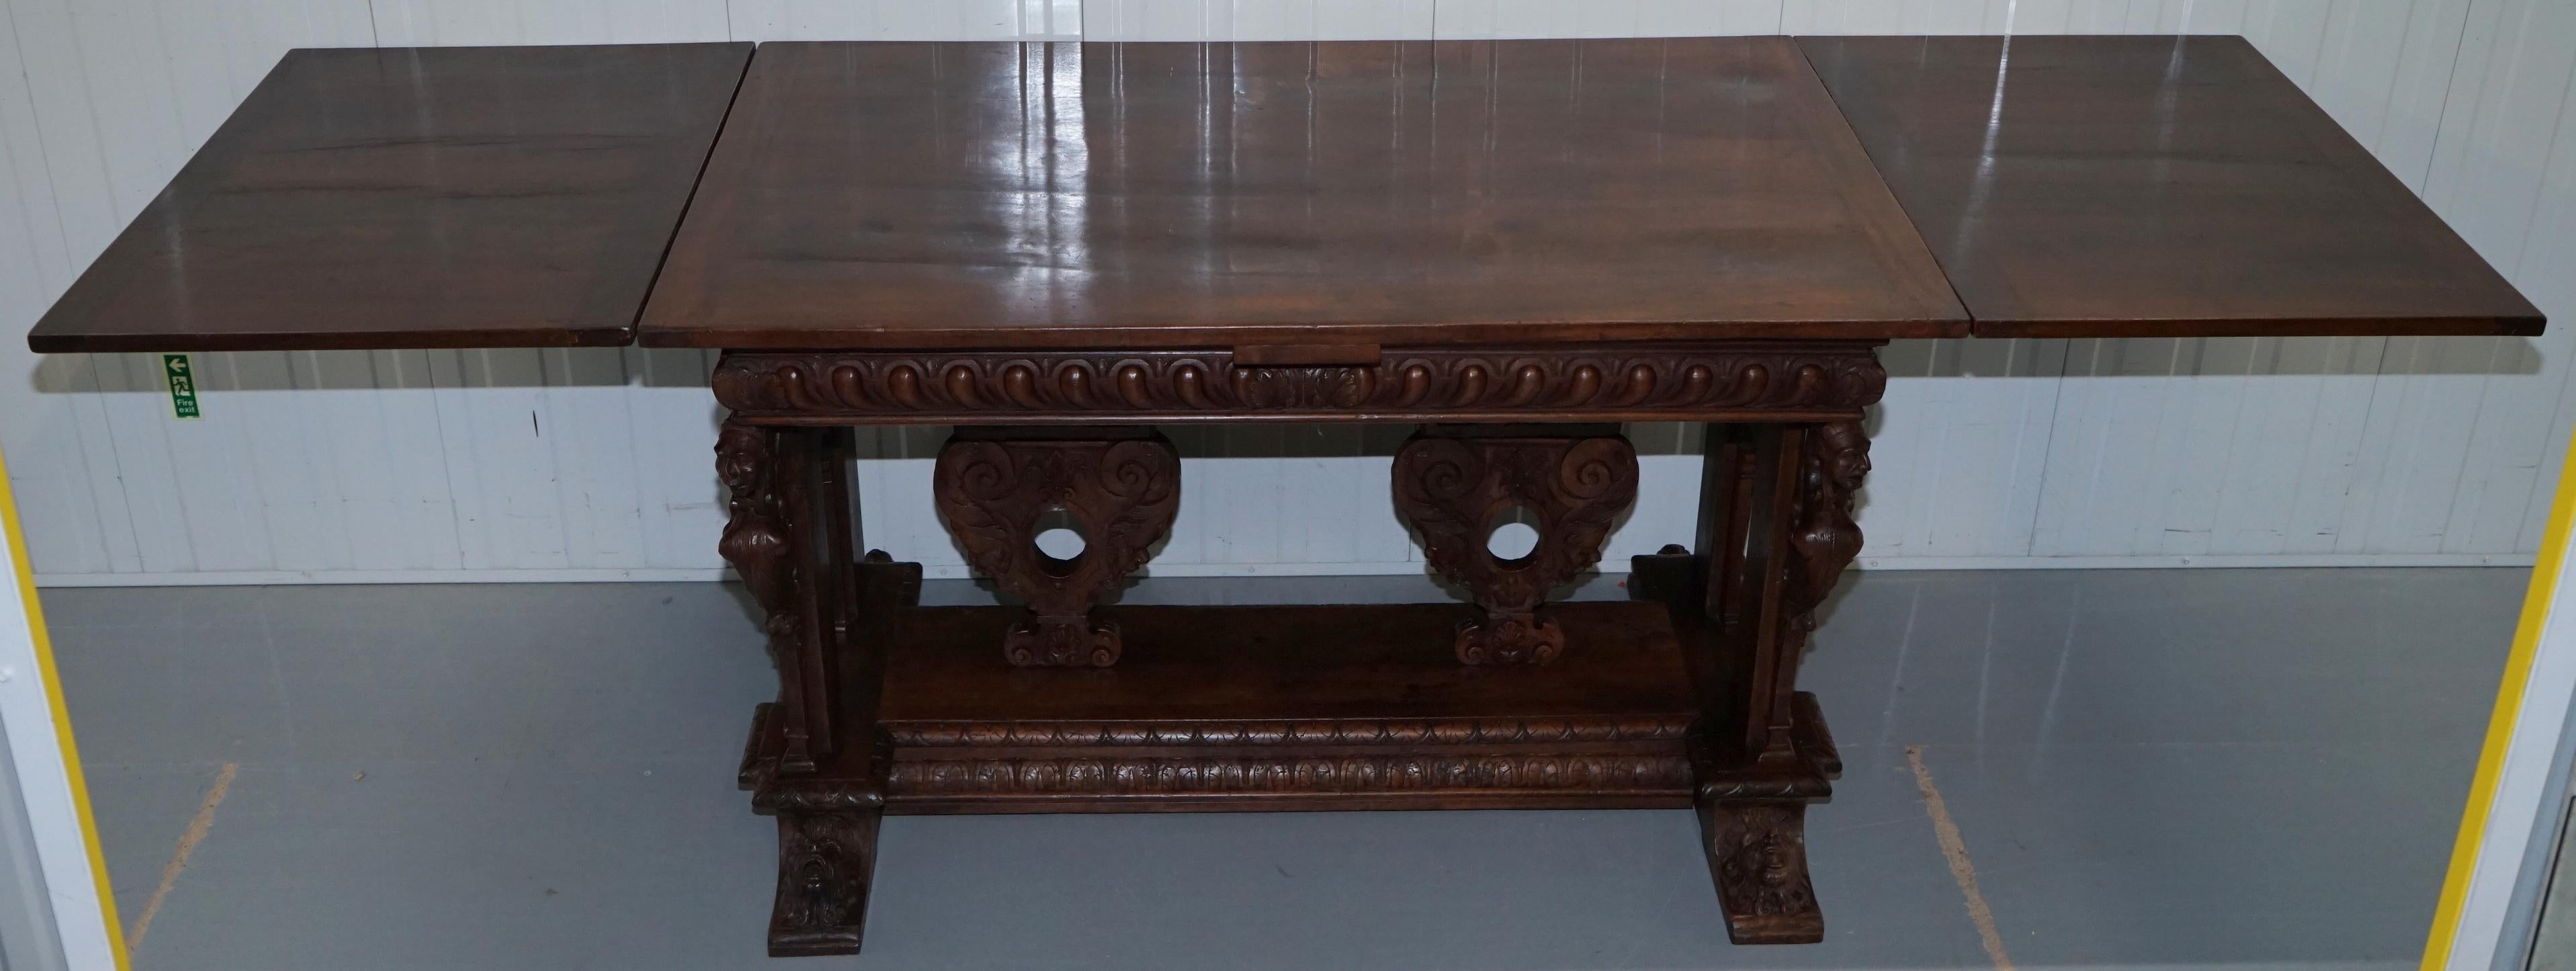 Rare 18th Century French Walnut Renaissance Extending High Table Heavily Carved For Sale 14